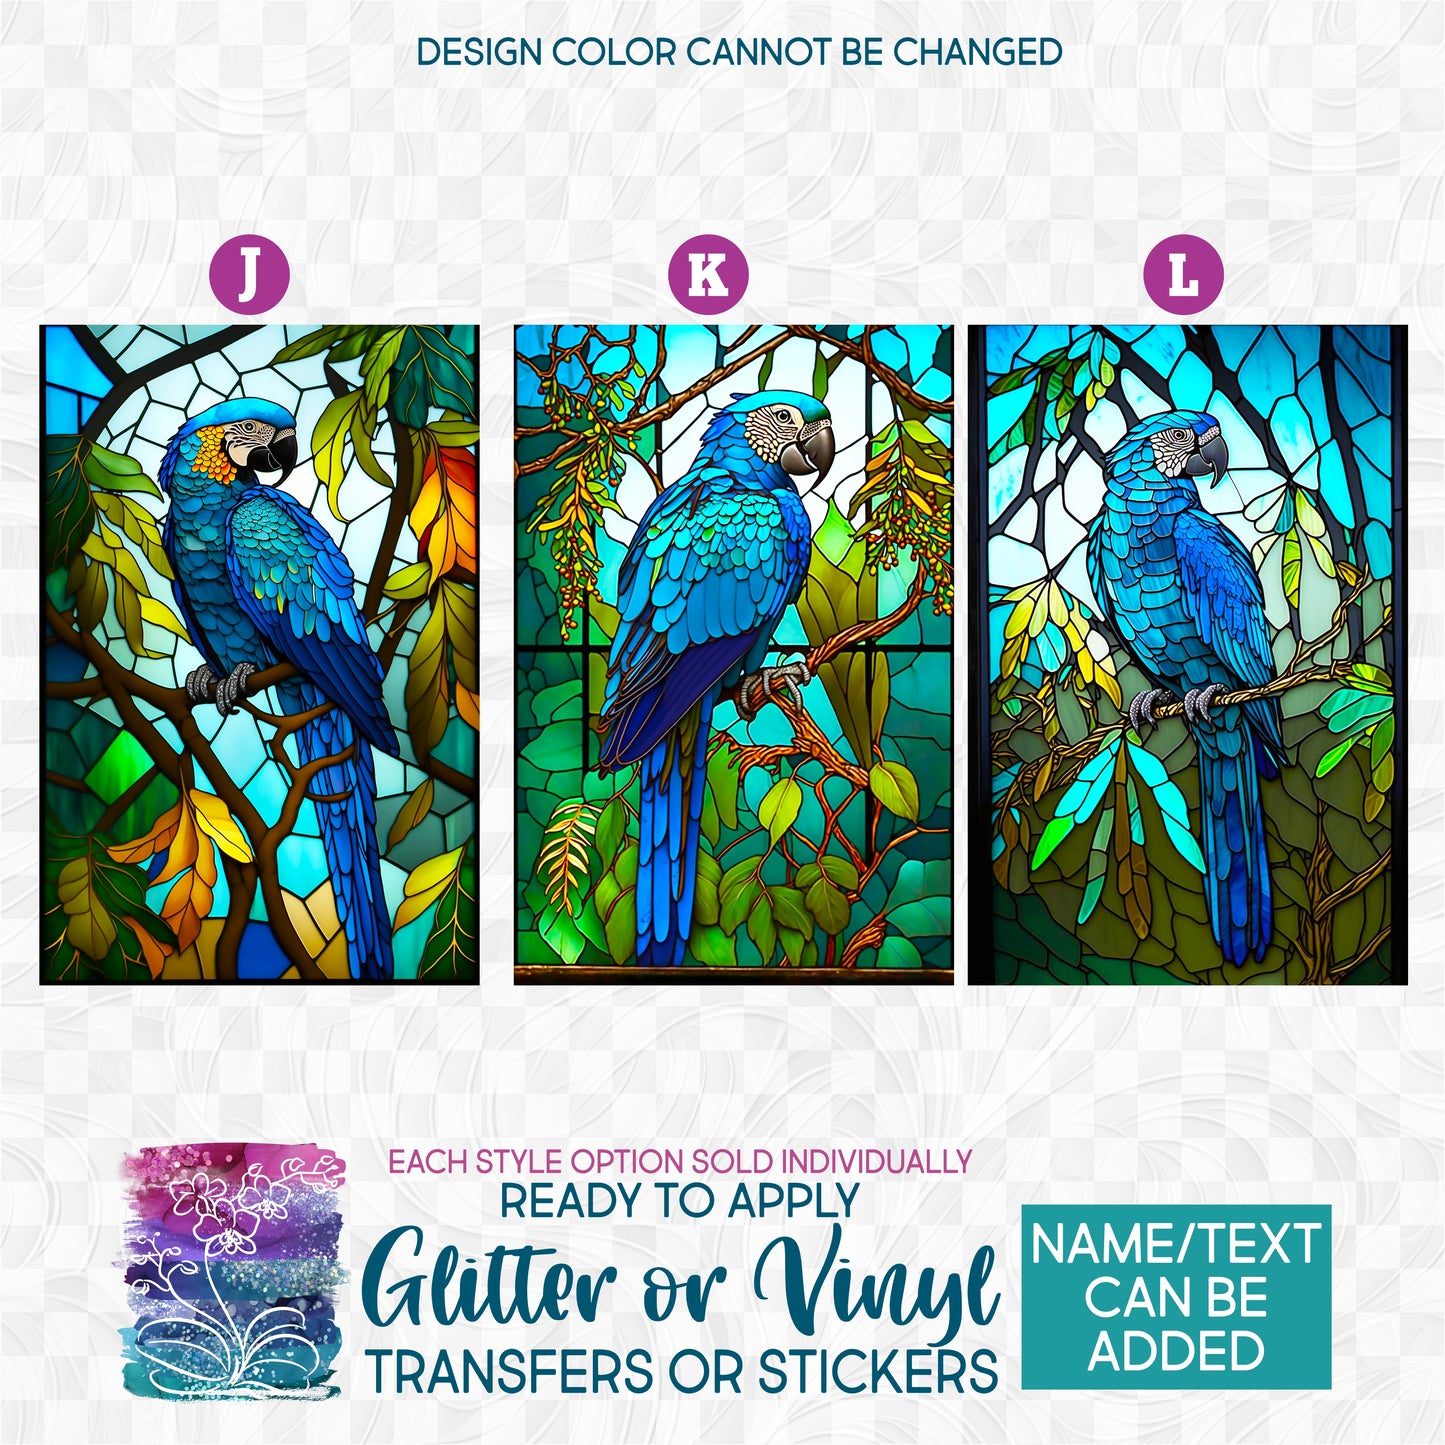 (s150-16) Stained-Glass Blue Gold Hyacinth Macaw a Glitter or Vinyl Iron-On Transfer or Sticker